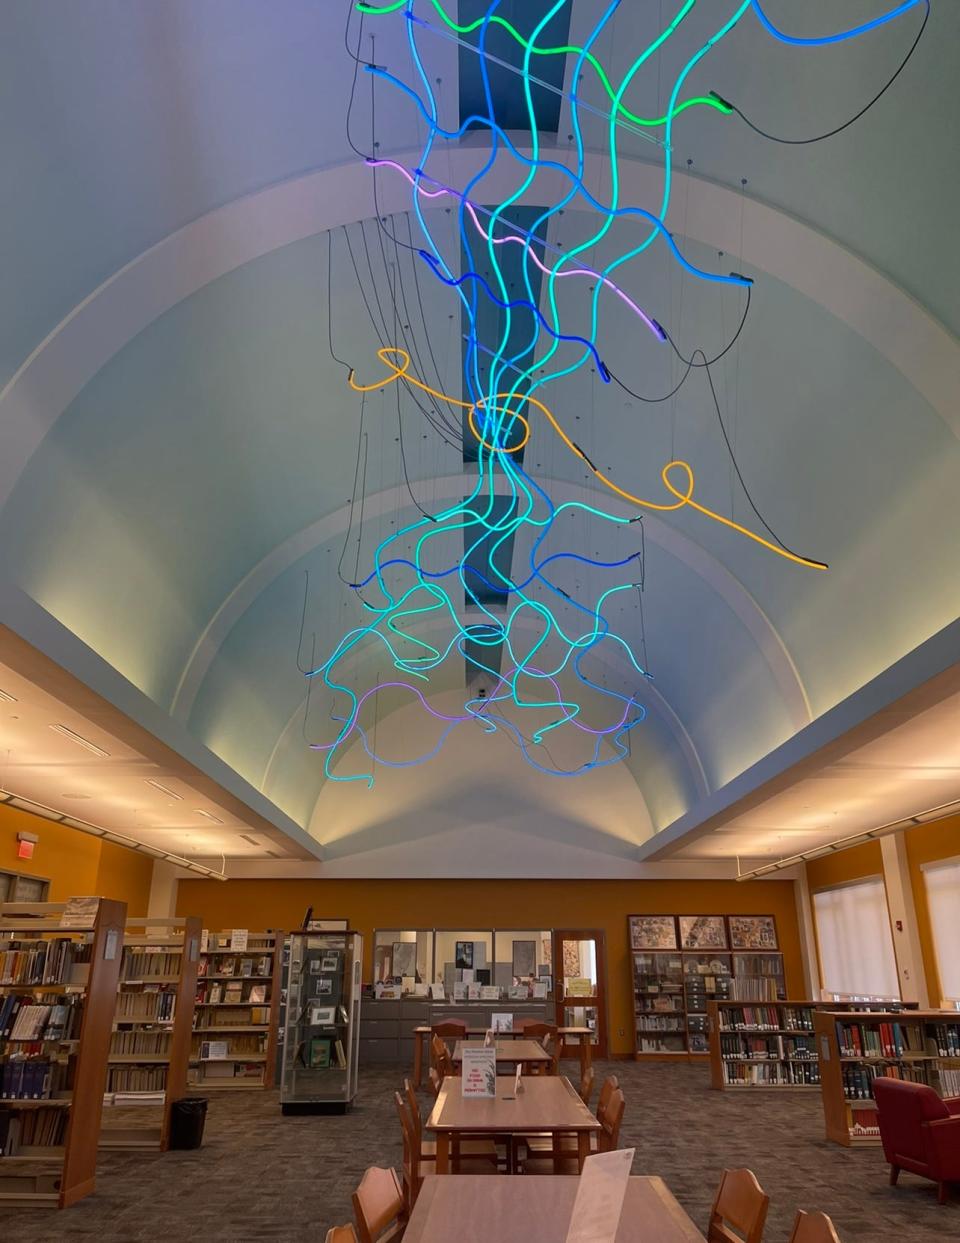 Local artist Chris Freeman's "Flowing Fabric/Woven Light" LED light sculpture, available for viewing in The Wheeler Room at the Toms River 
branch of the Ocean County Library.